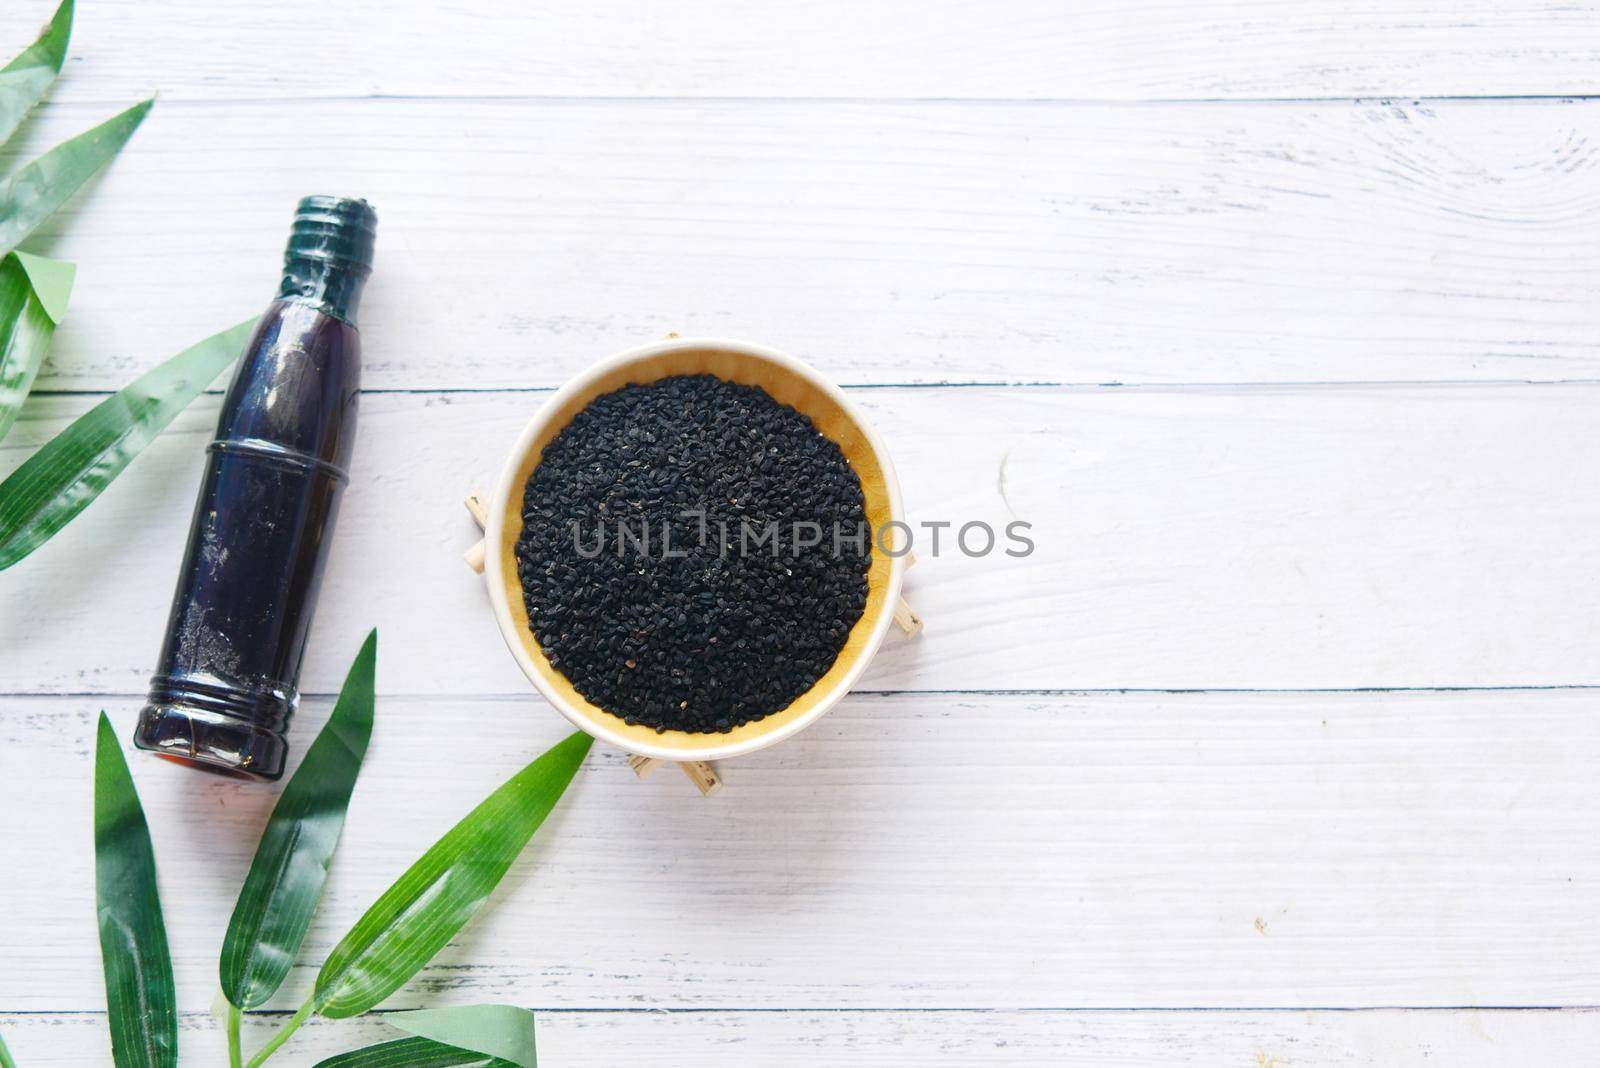 Black Cumin in a container with oil in a jar on table